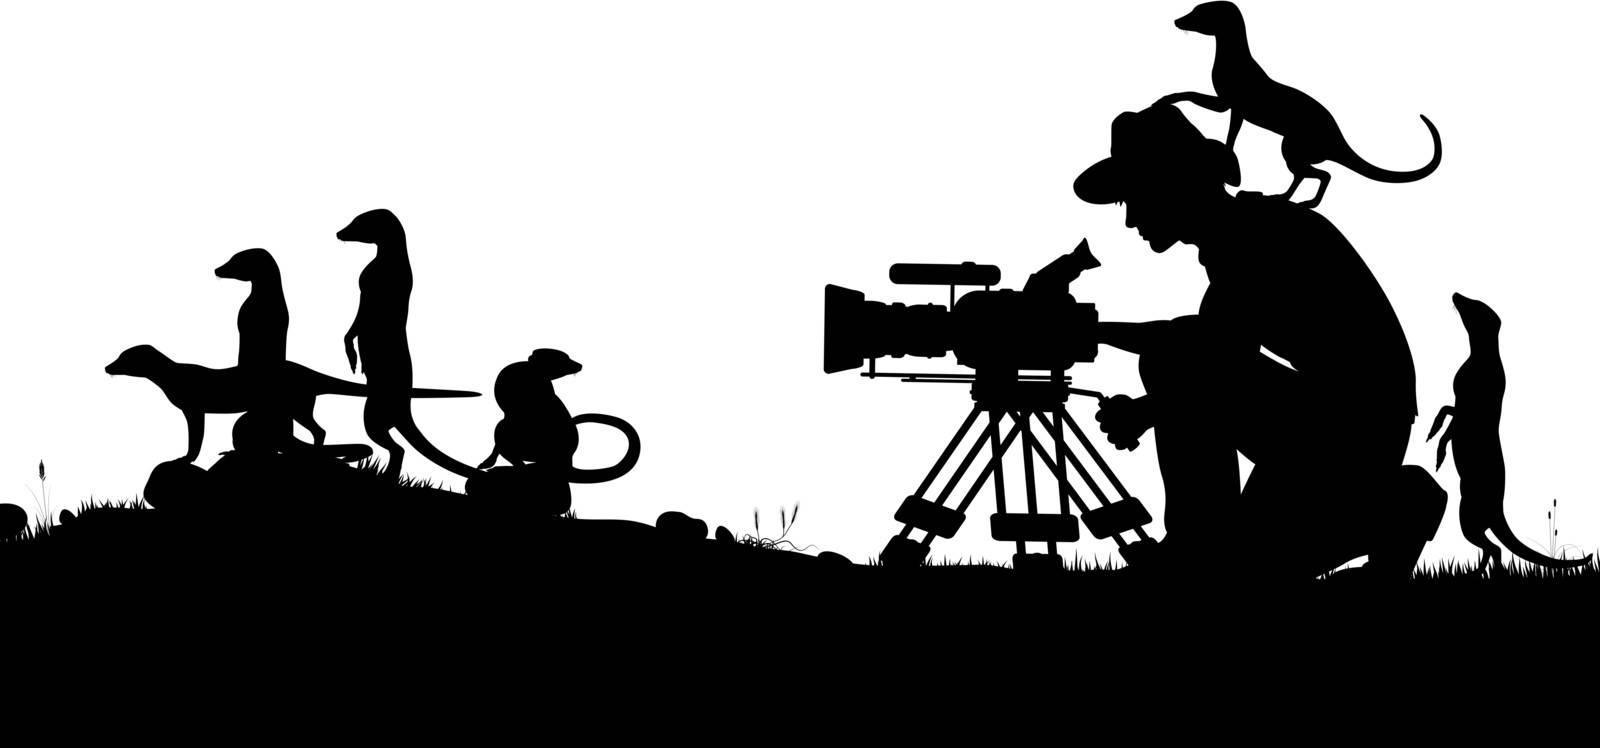 Editable vector silhouettes of a cameraman filming meerkats with all elements as separate objects